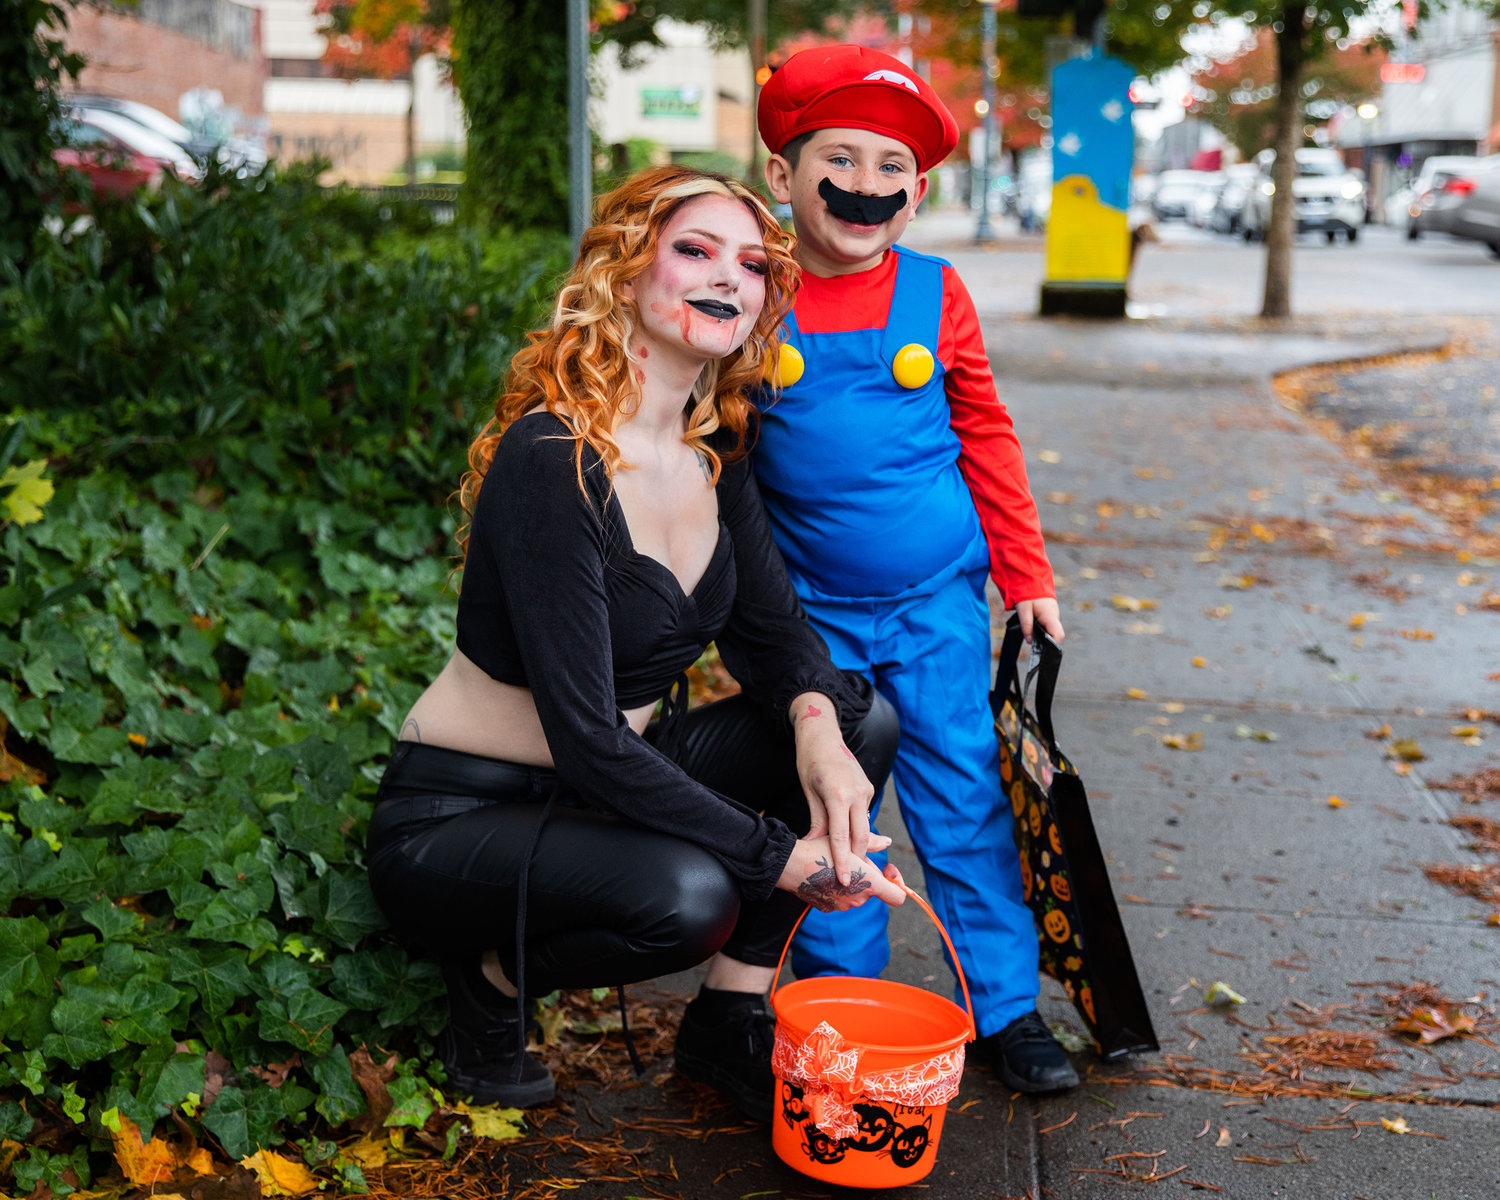 Raven Macklin and Josiah Montelongo, 6, pose for a photo in downtown Centralia while trick-or-treating on Halloween.